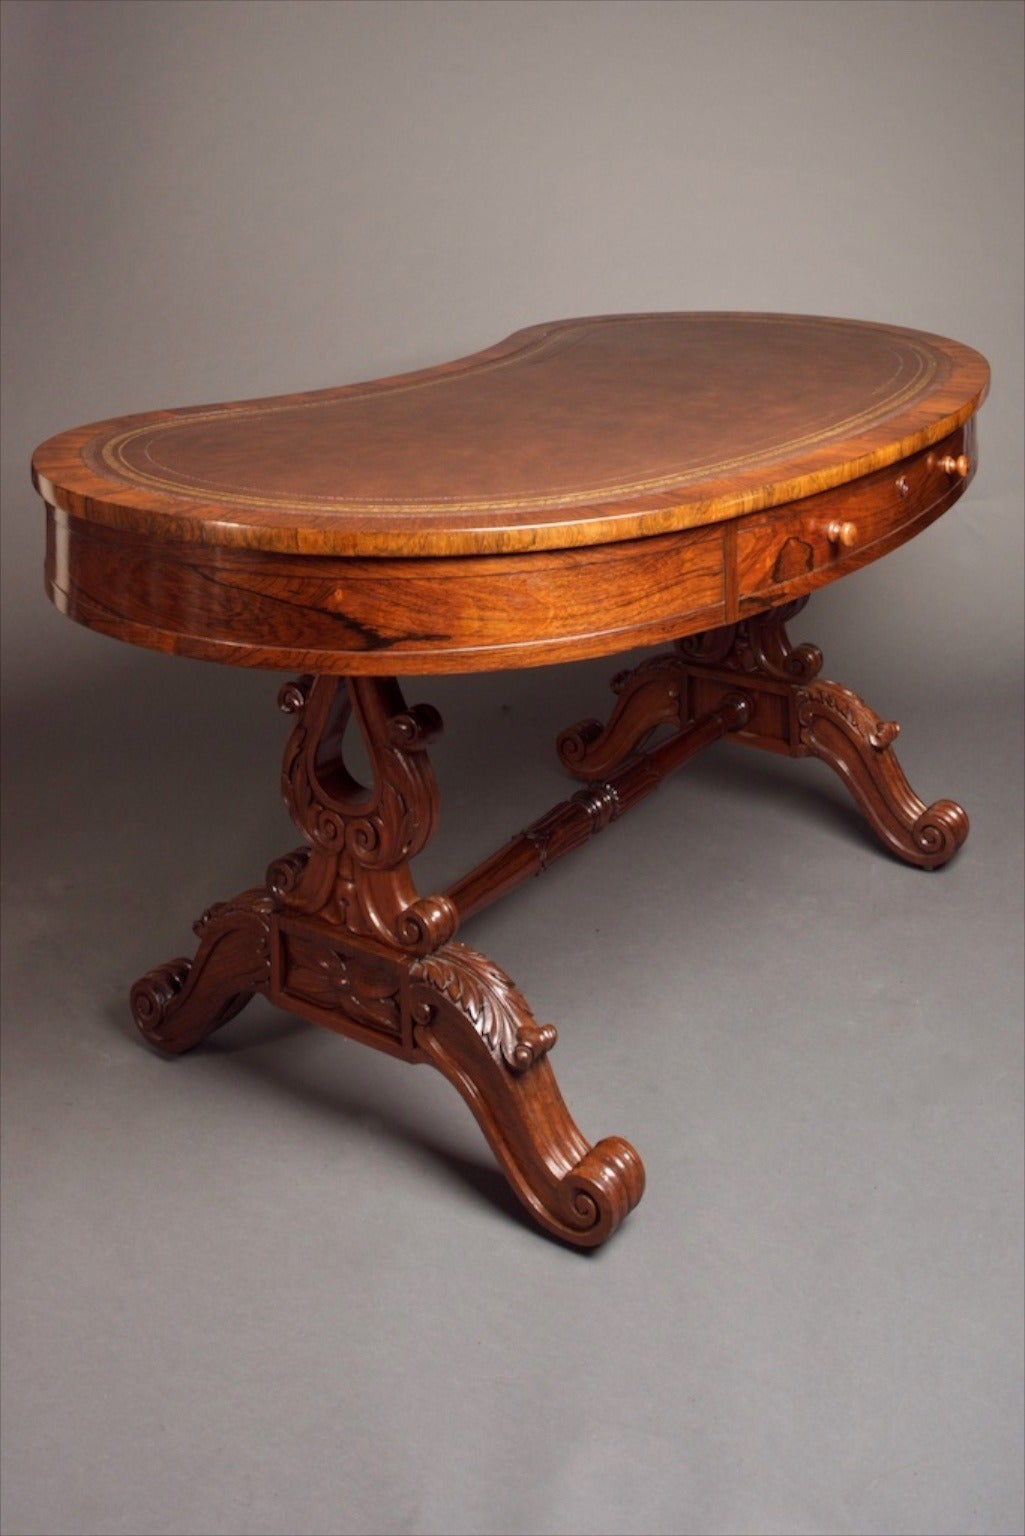 Rare William IV Kidney Desk in Rosewood.

William IV Kidney Desk, English, circa 1830s. The desk is supported upon lyre shaped trestles connected by a turned and carved stretcher. Tooled leather top with one drawer the other side having a faux